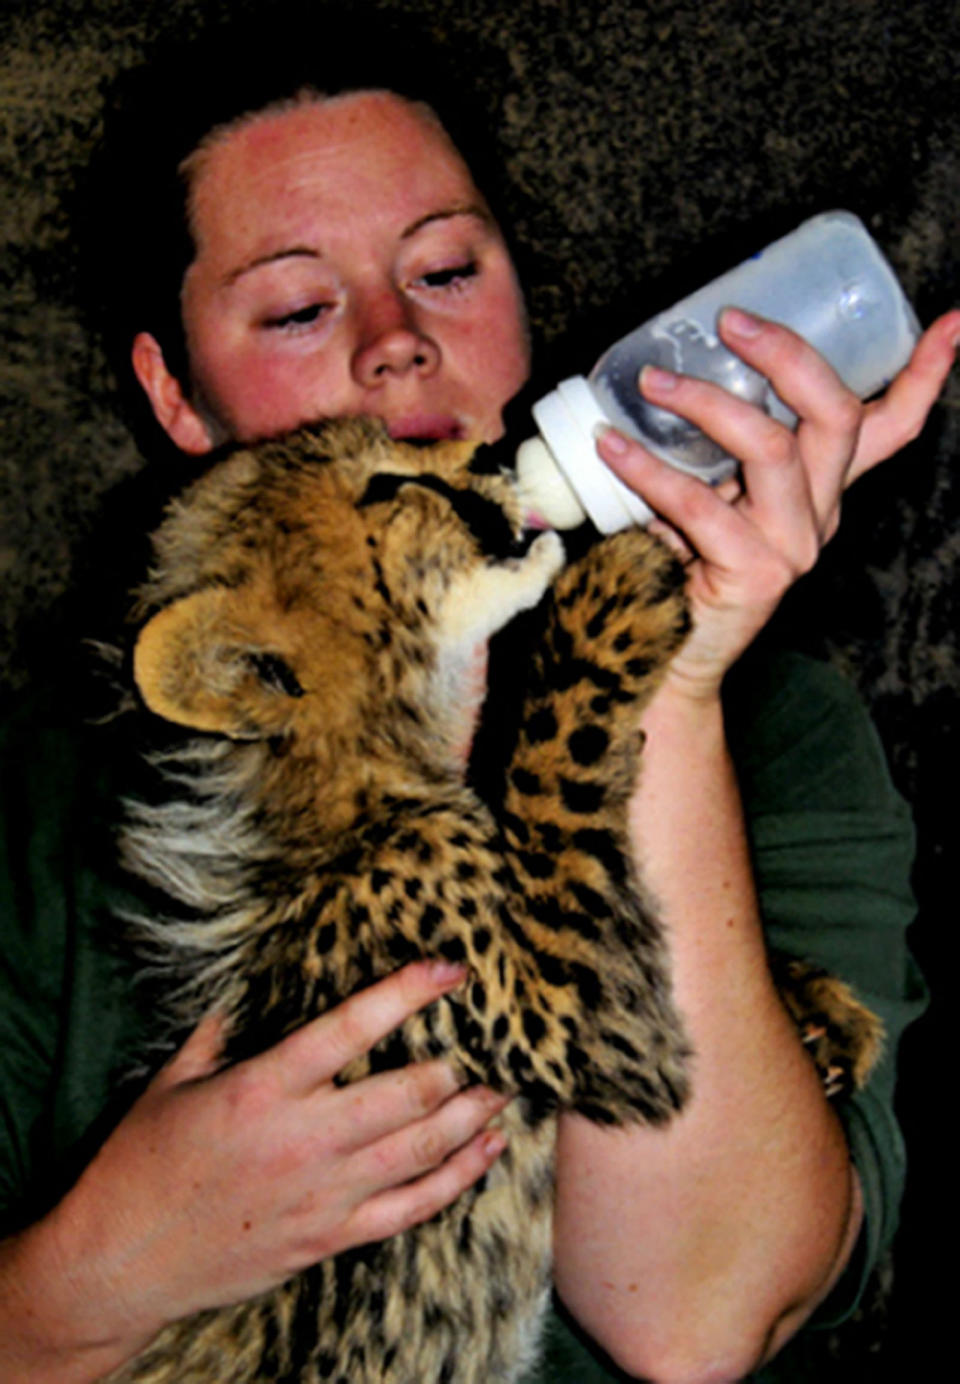 Rosa King holding and feeding a tiger cub at the zoo in the UK.